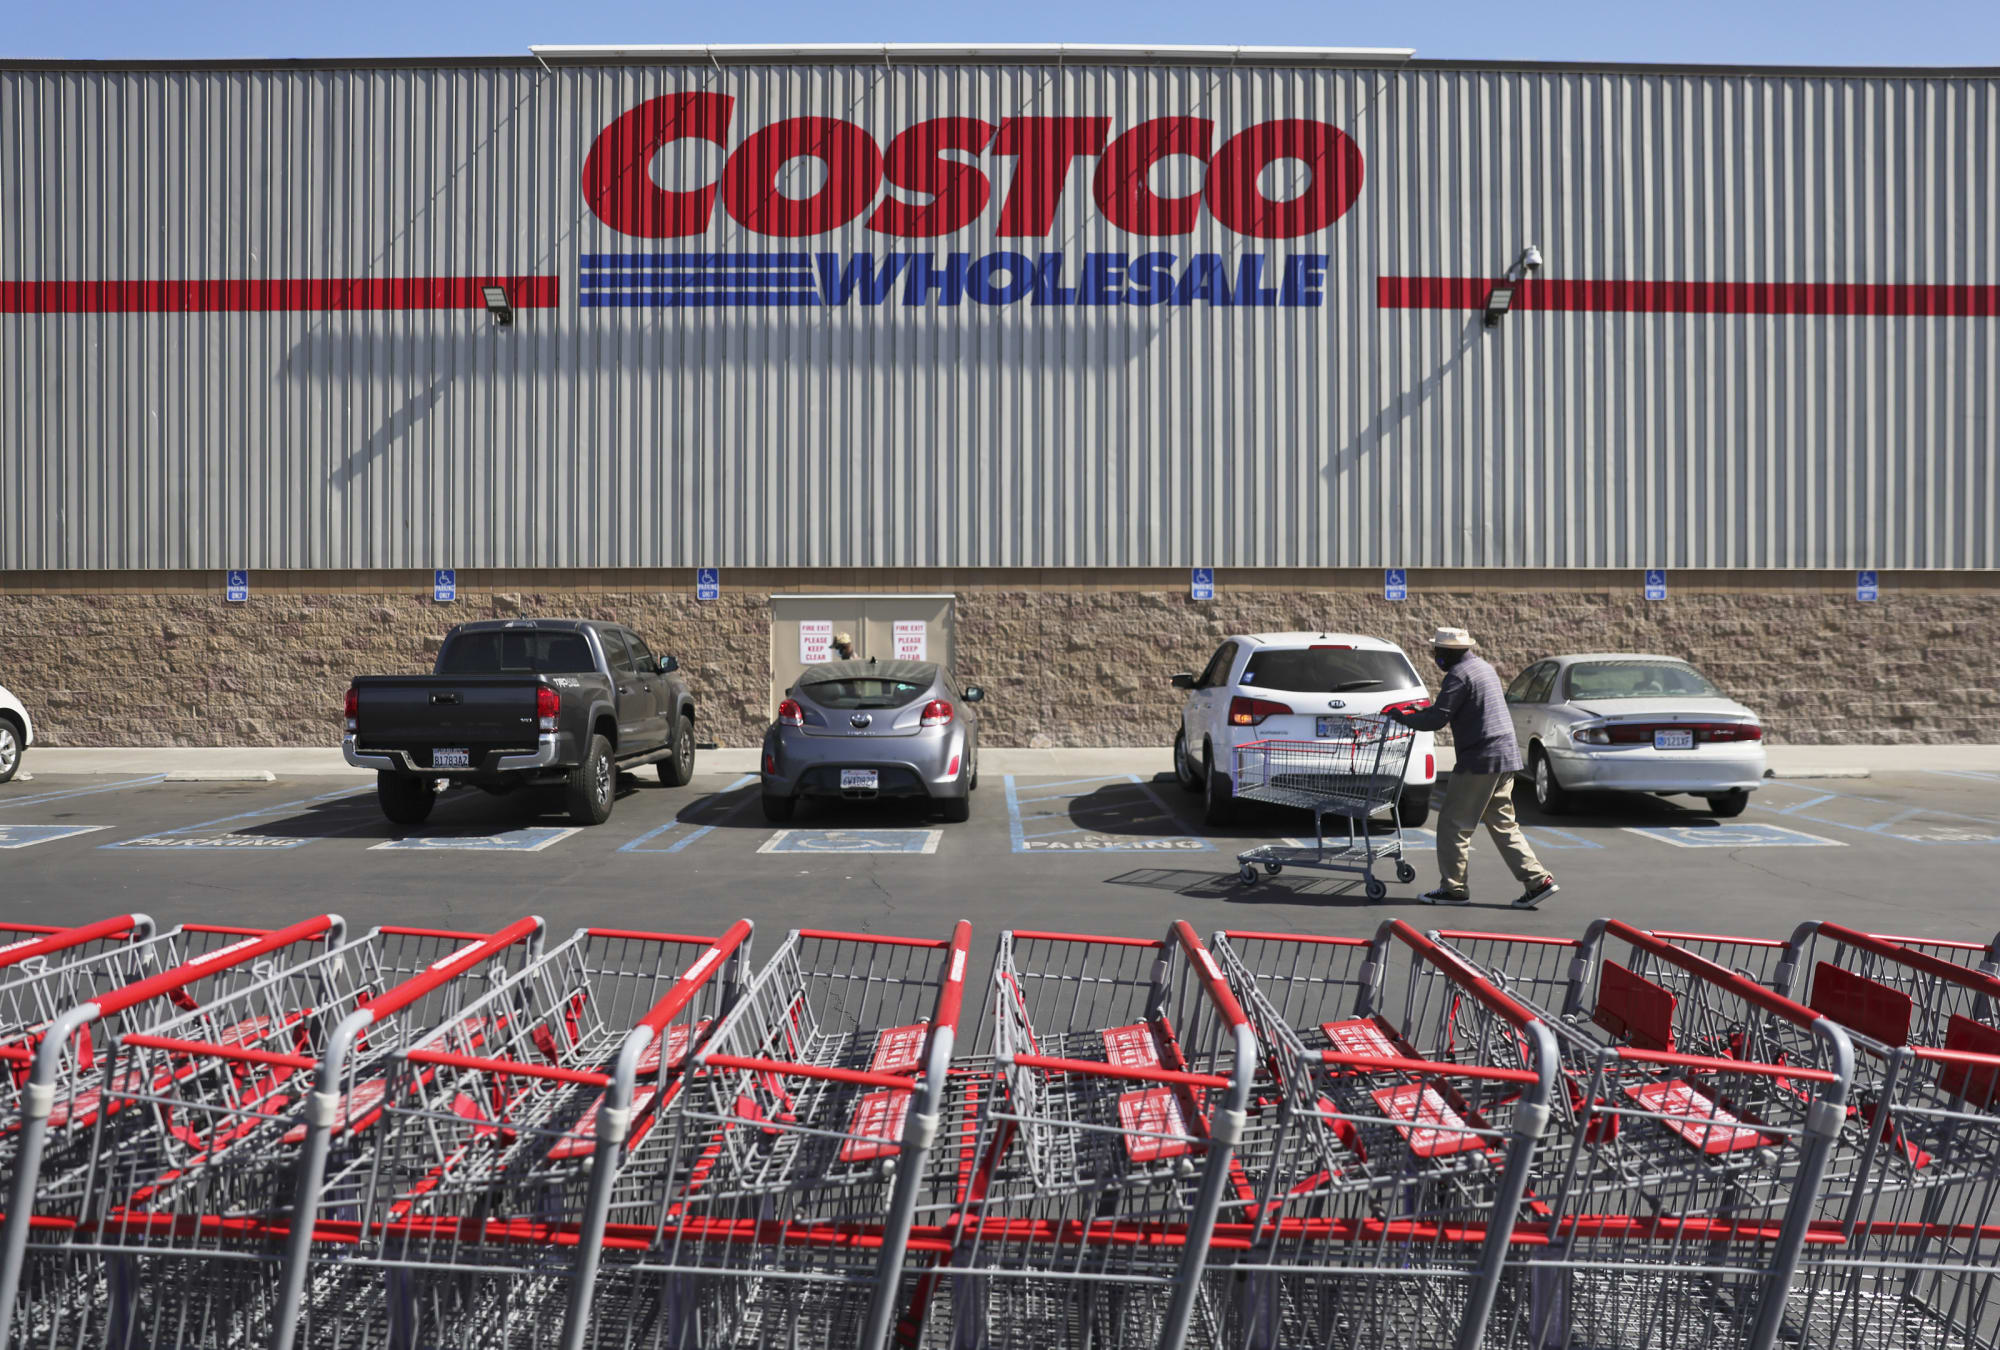 Will Costco be open on Easter 2021?